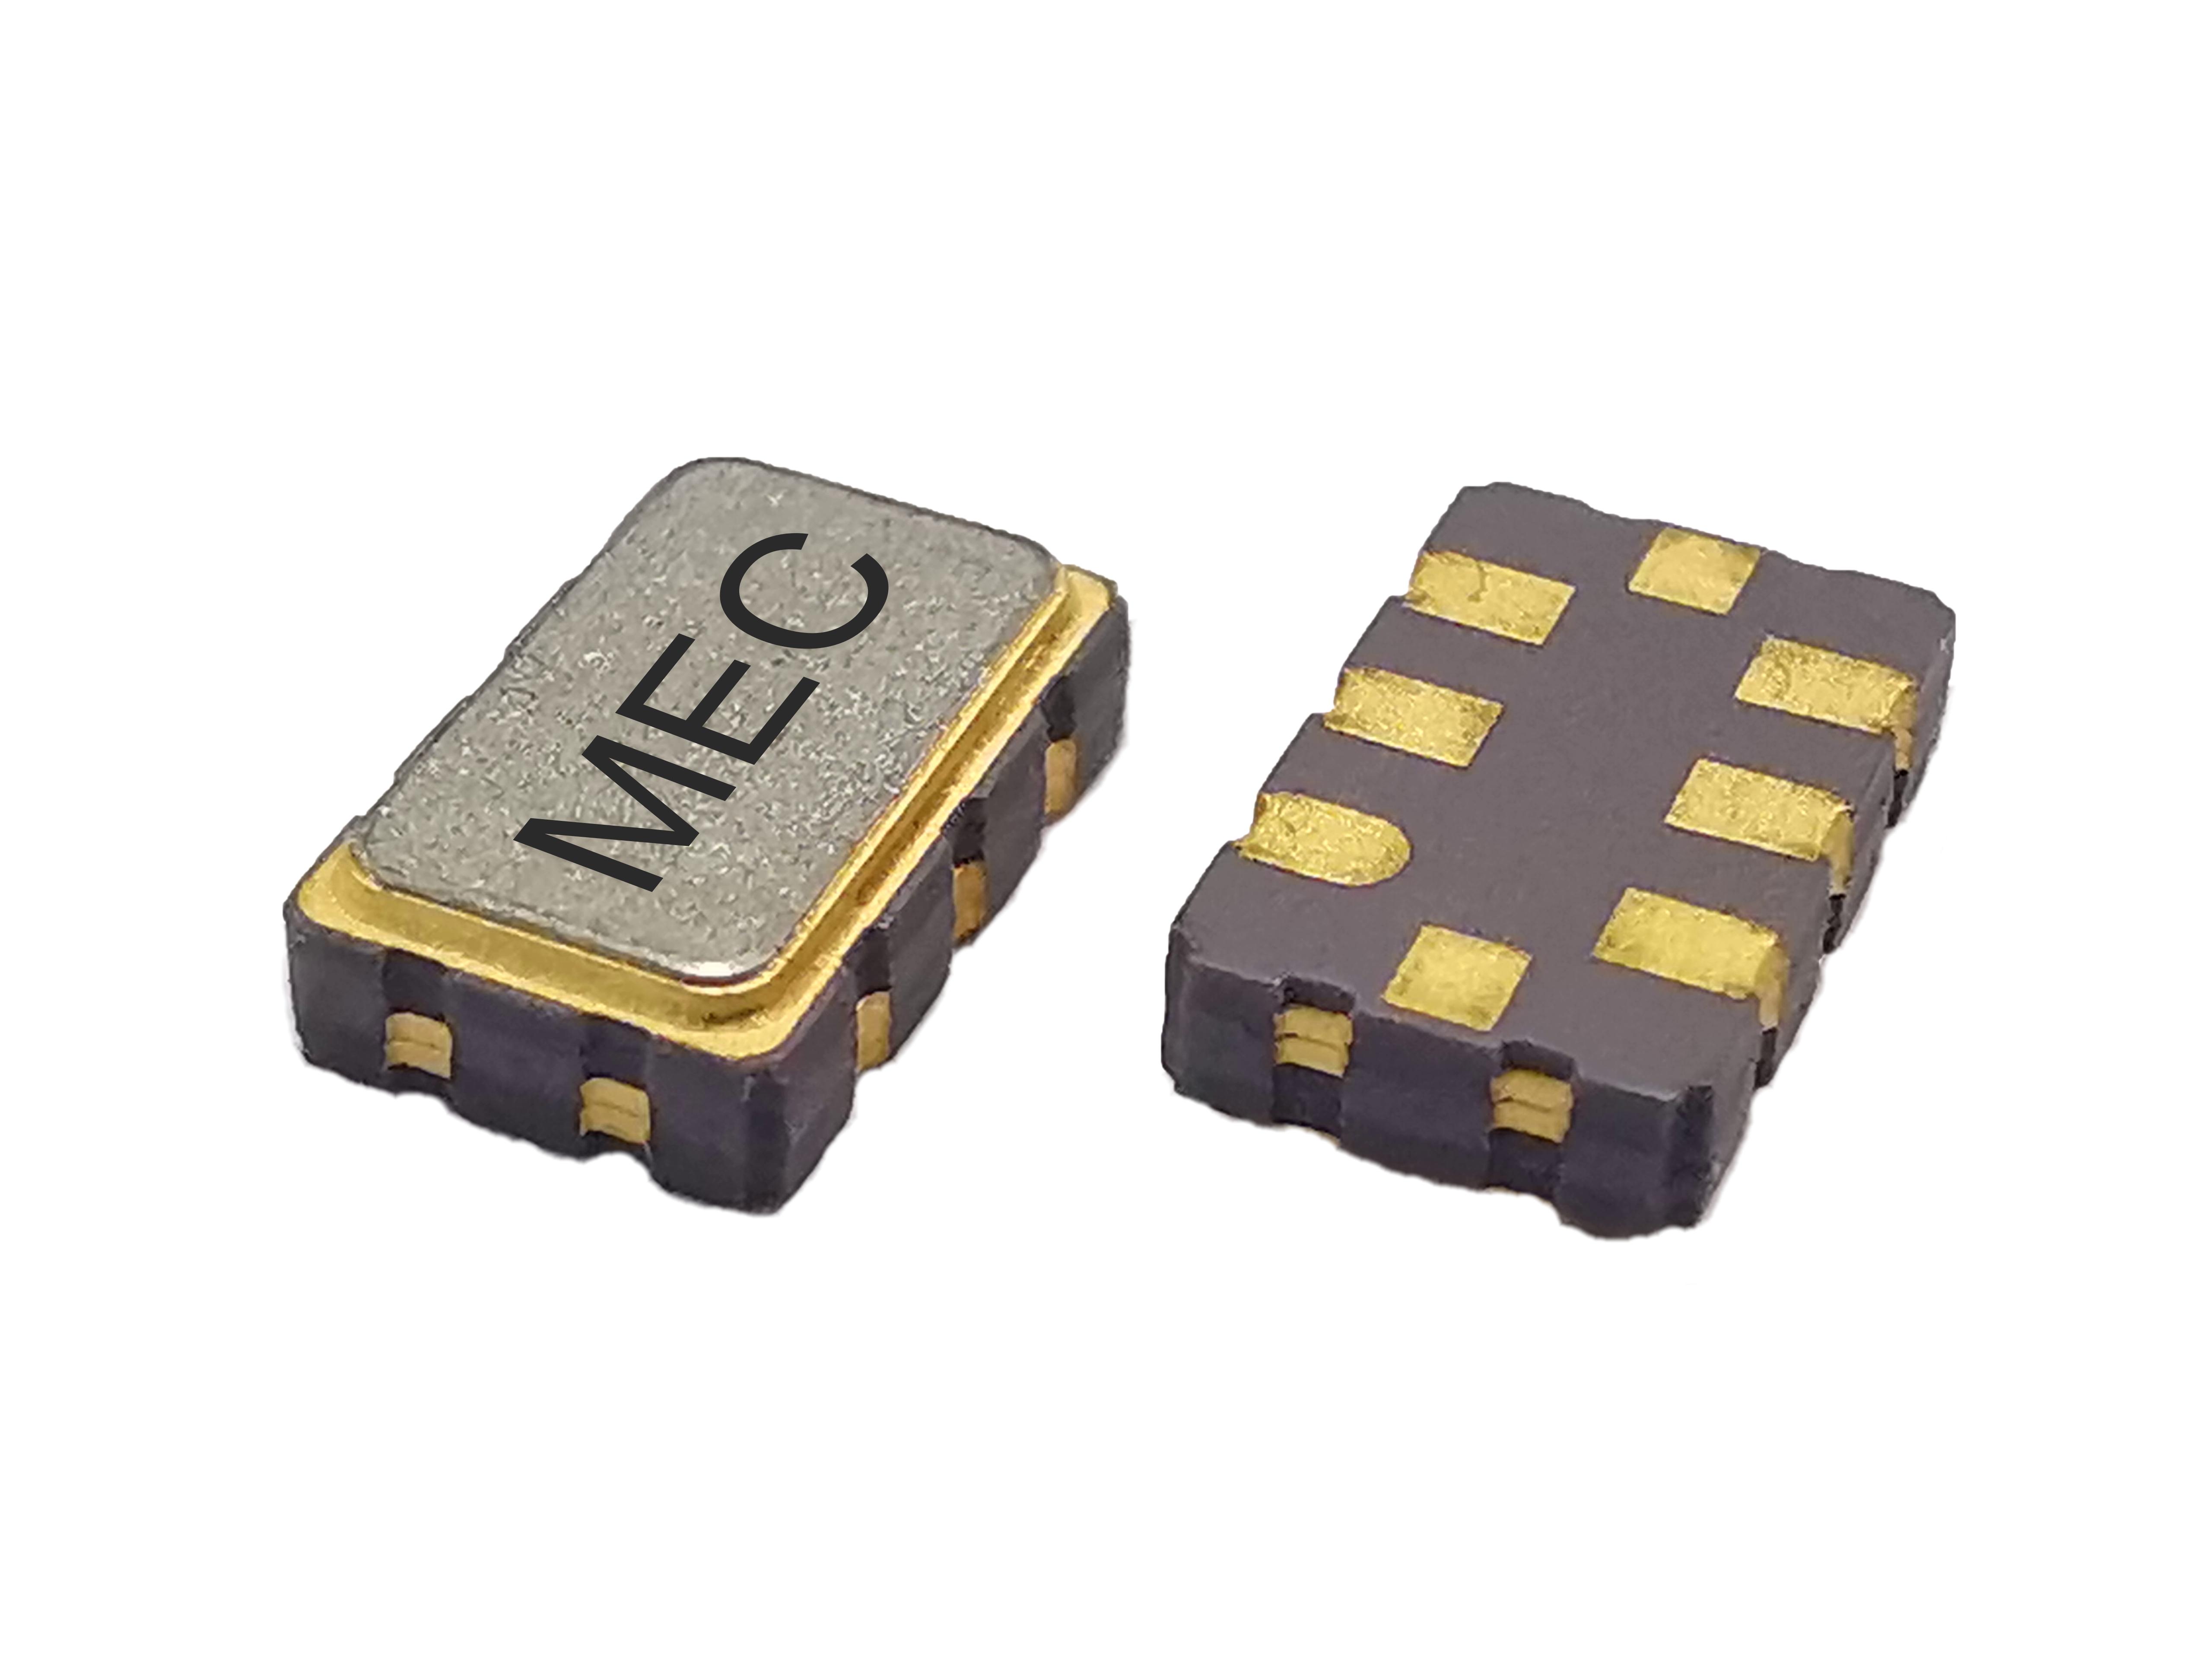 HPJF328 3225 2.5V Ultra Low Jitter Quick-turn Programmable Differential LVPECL SMD Crystal Oscillator